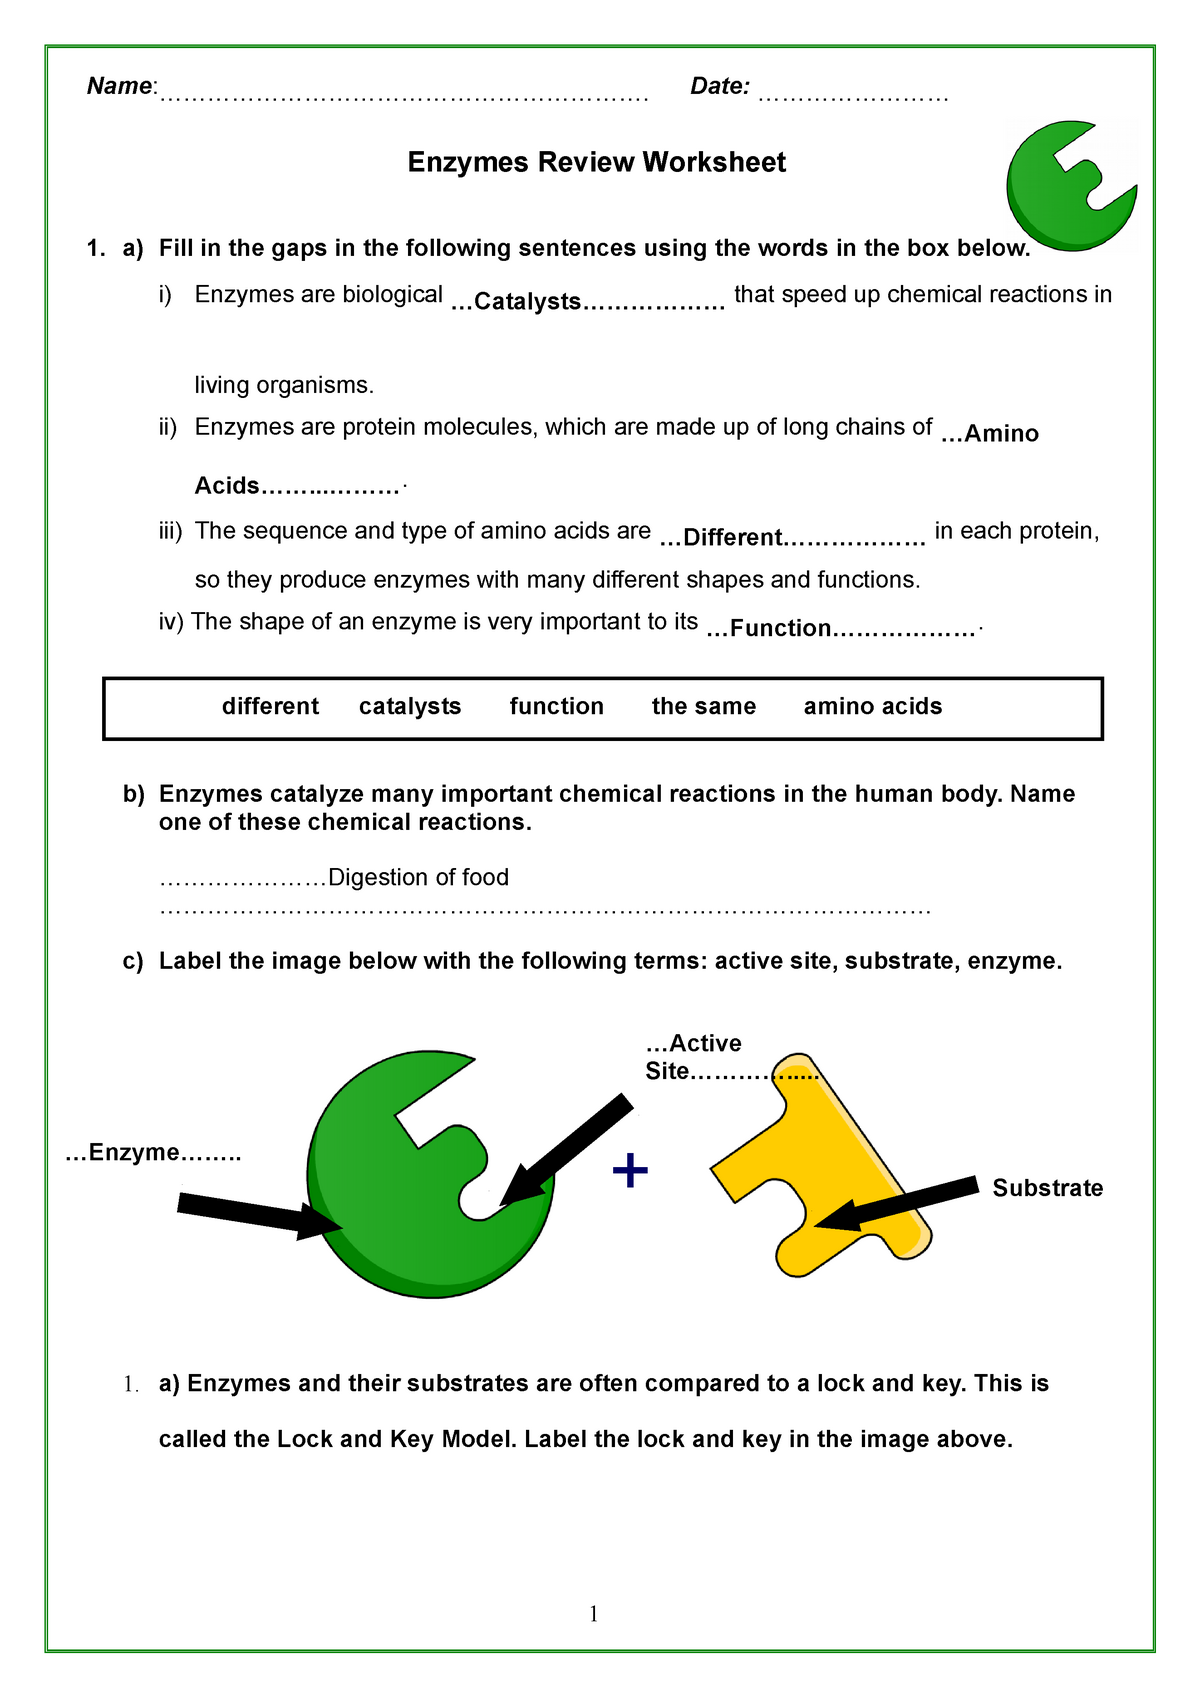 Enzymes review activity key - BLAW22 - StuDocu For Enzyme Review Worksheet Answers